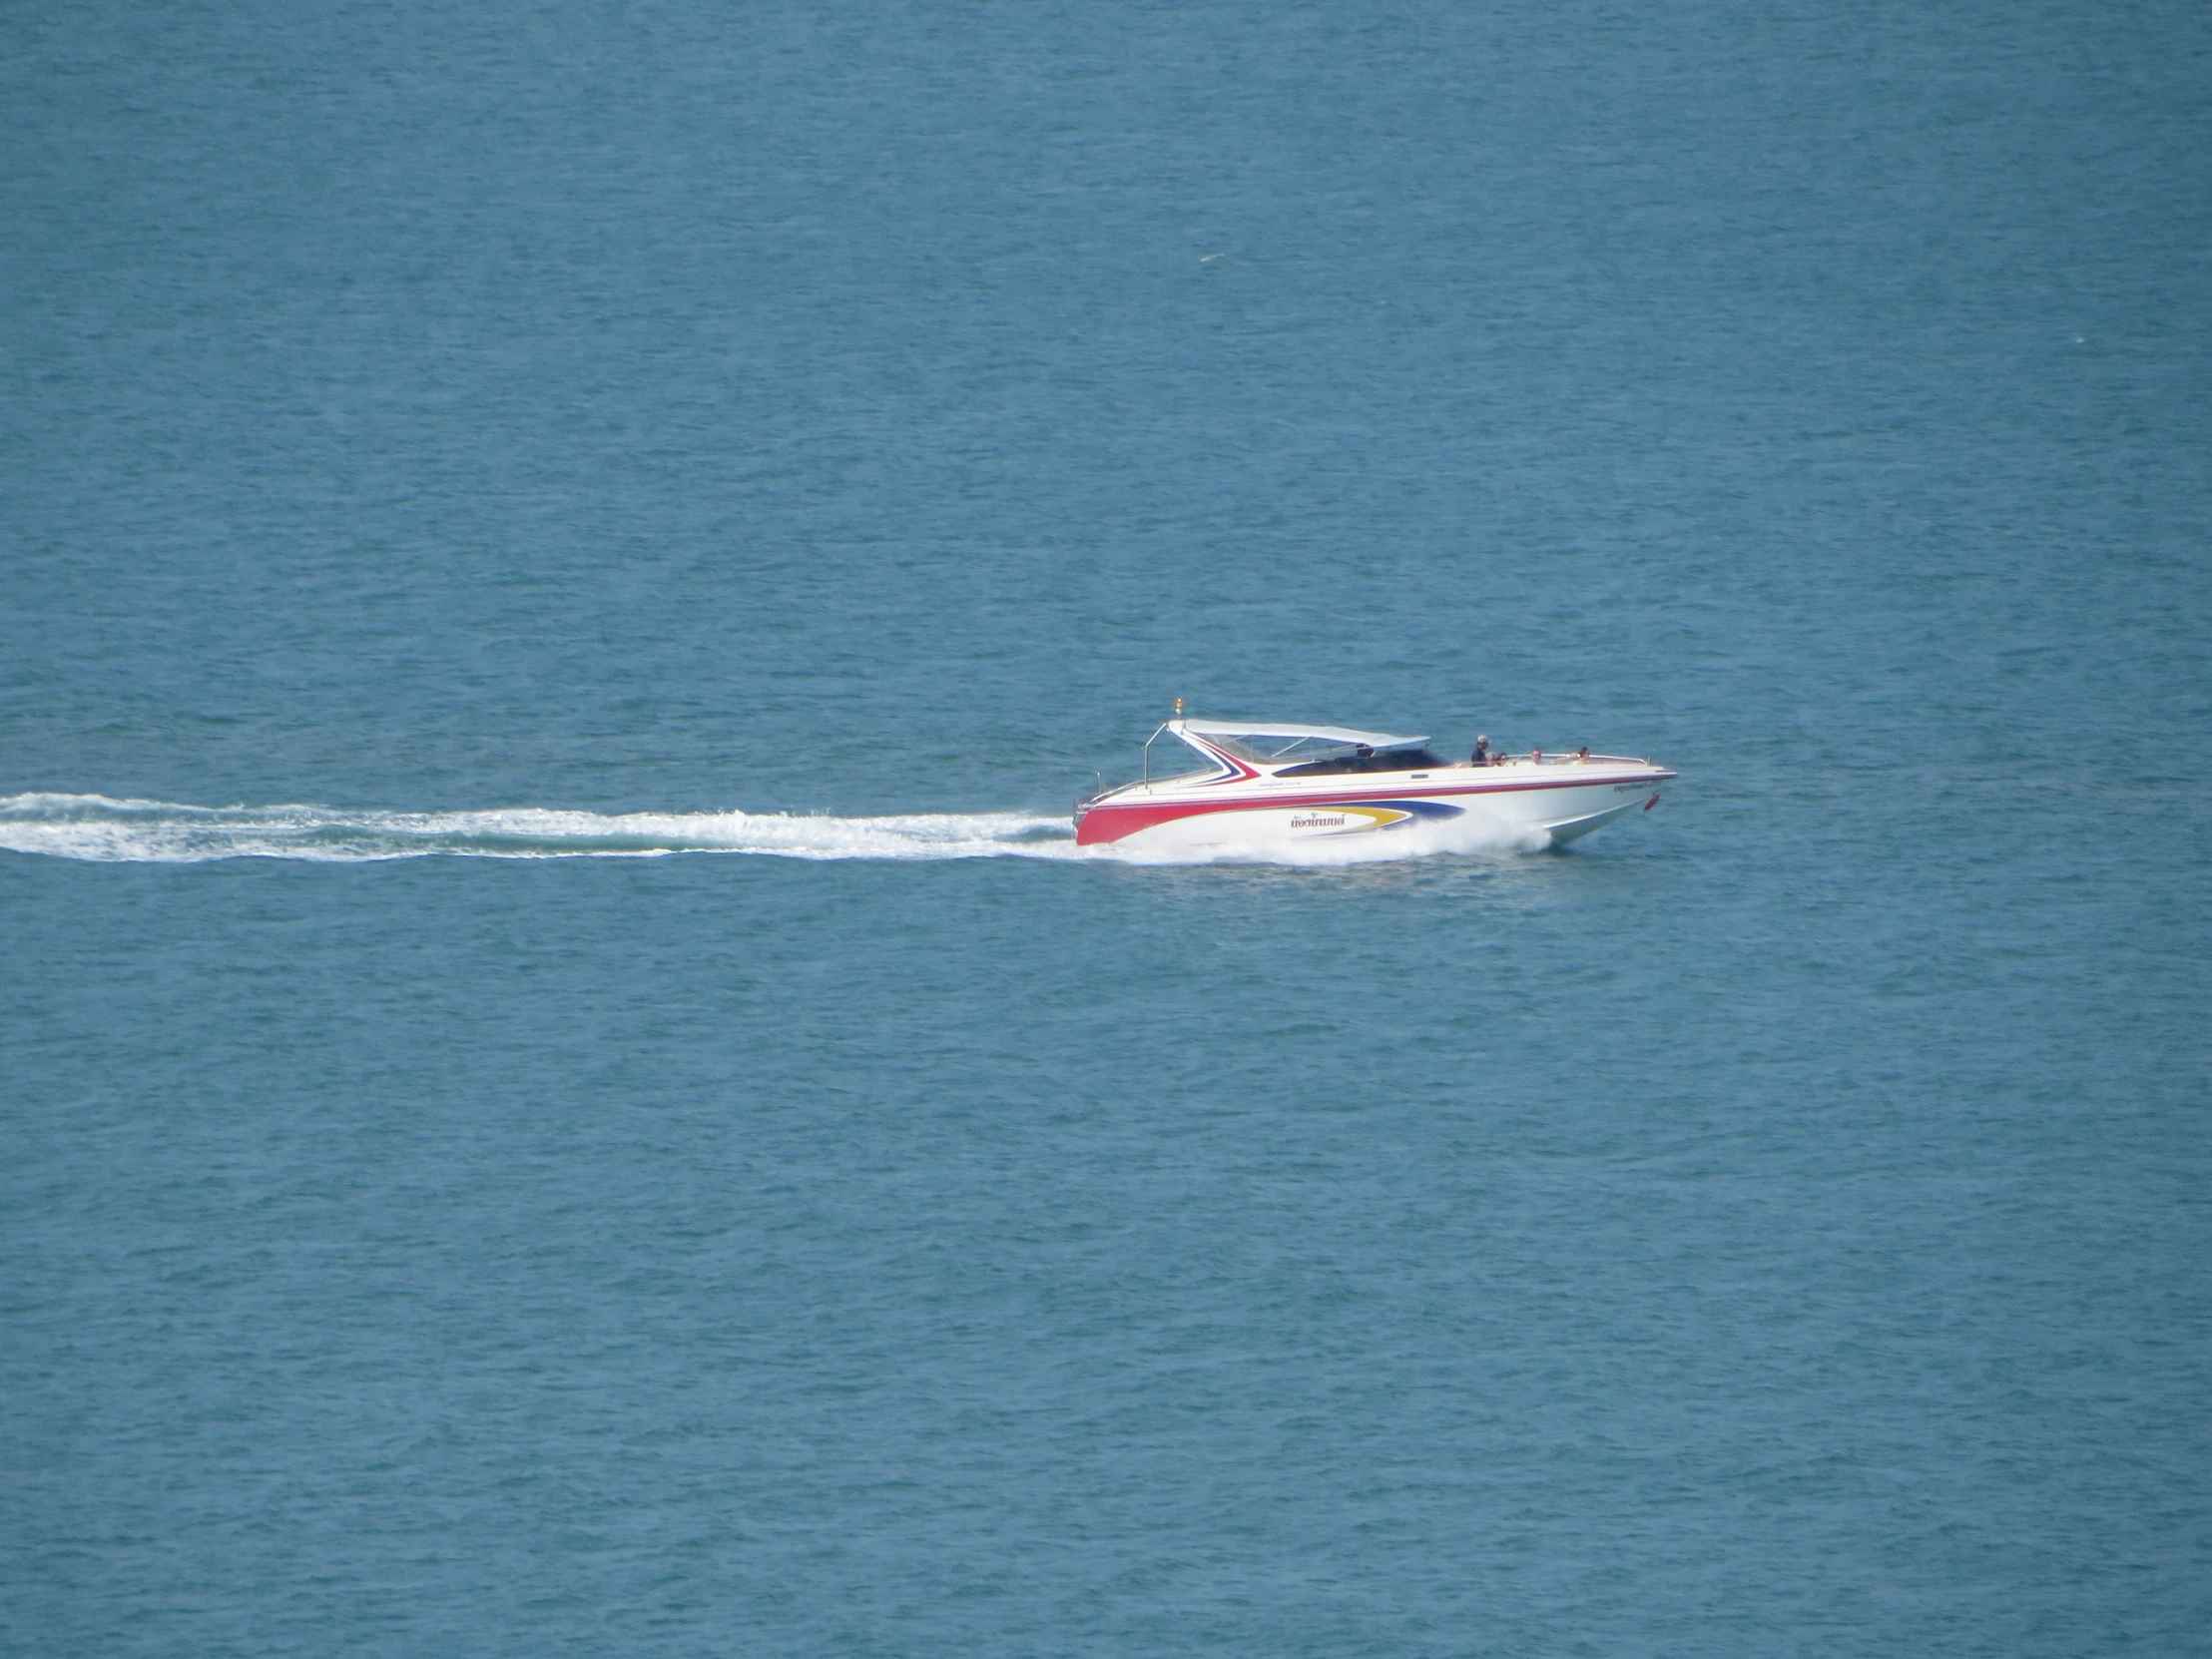 a white and red boat speeding across the ocean